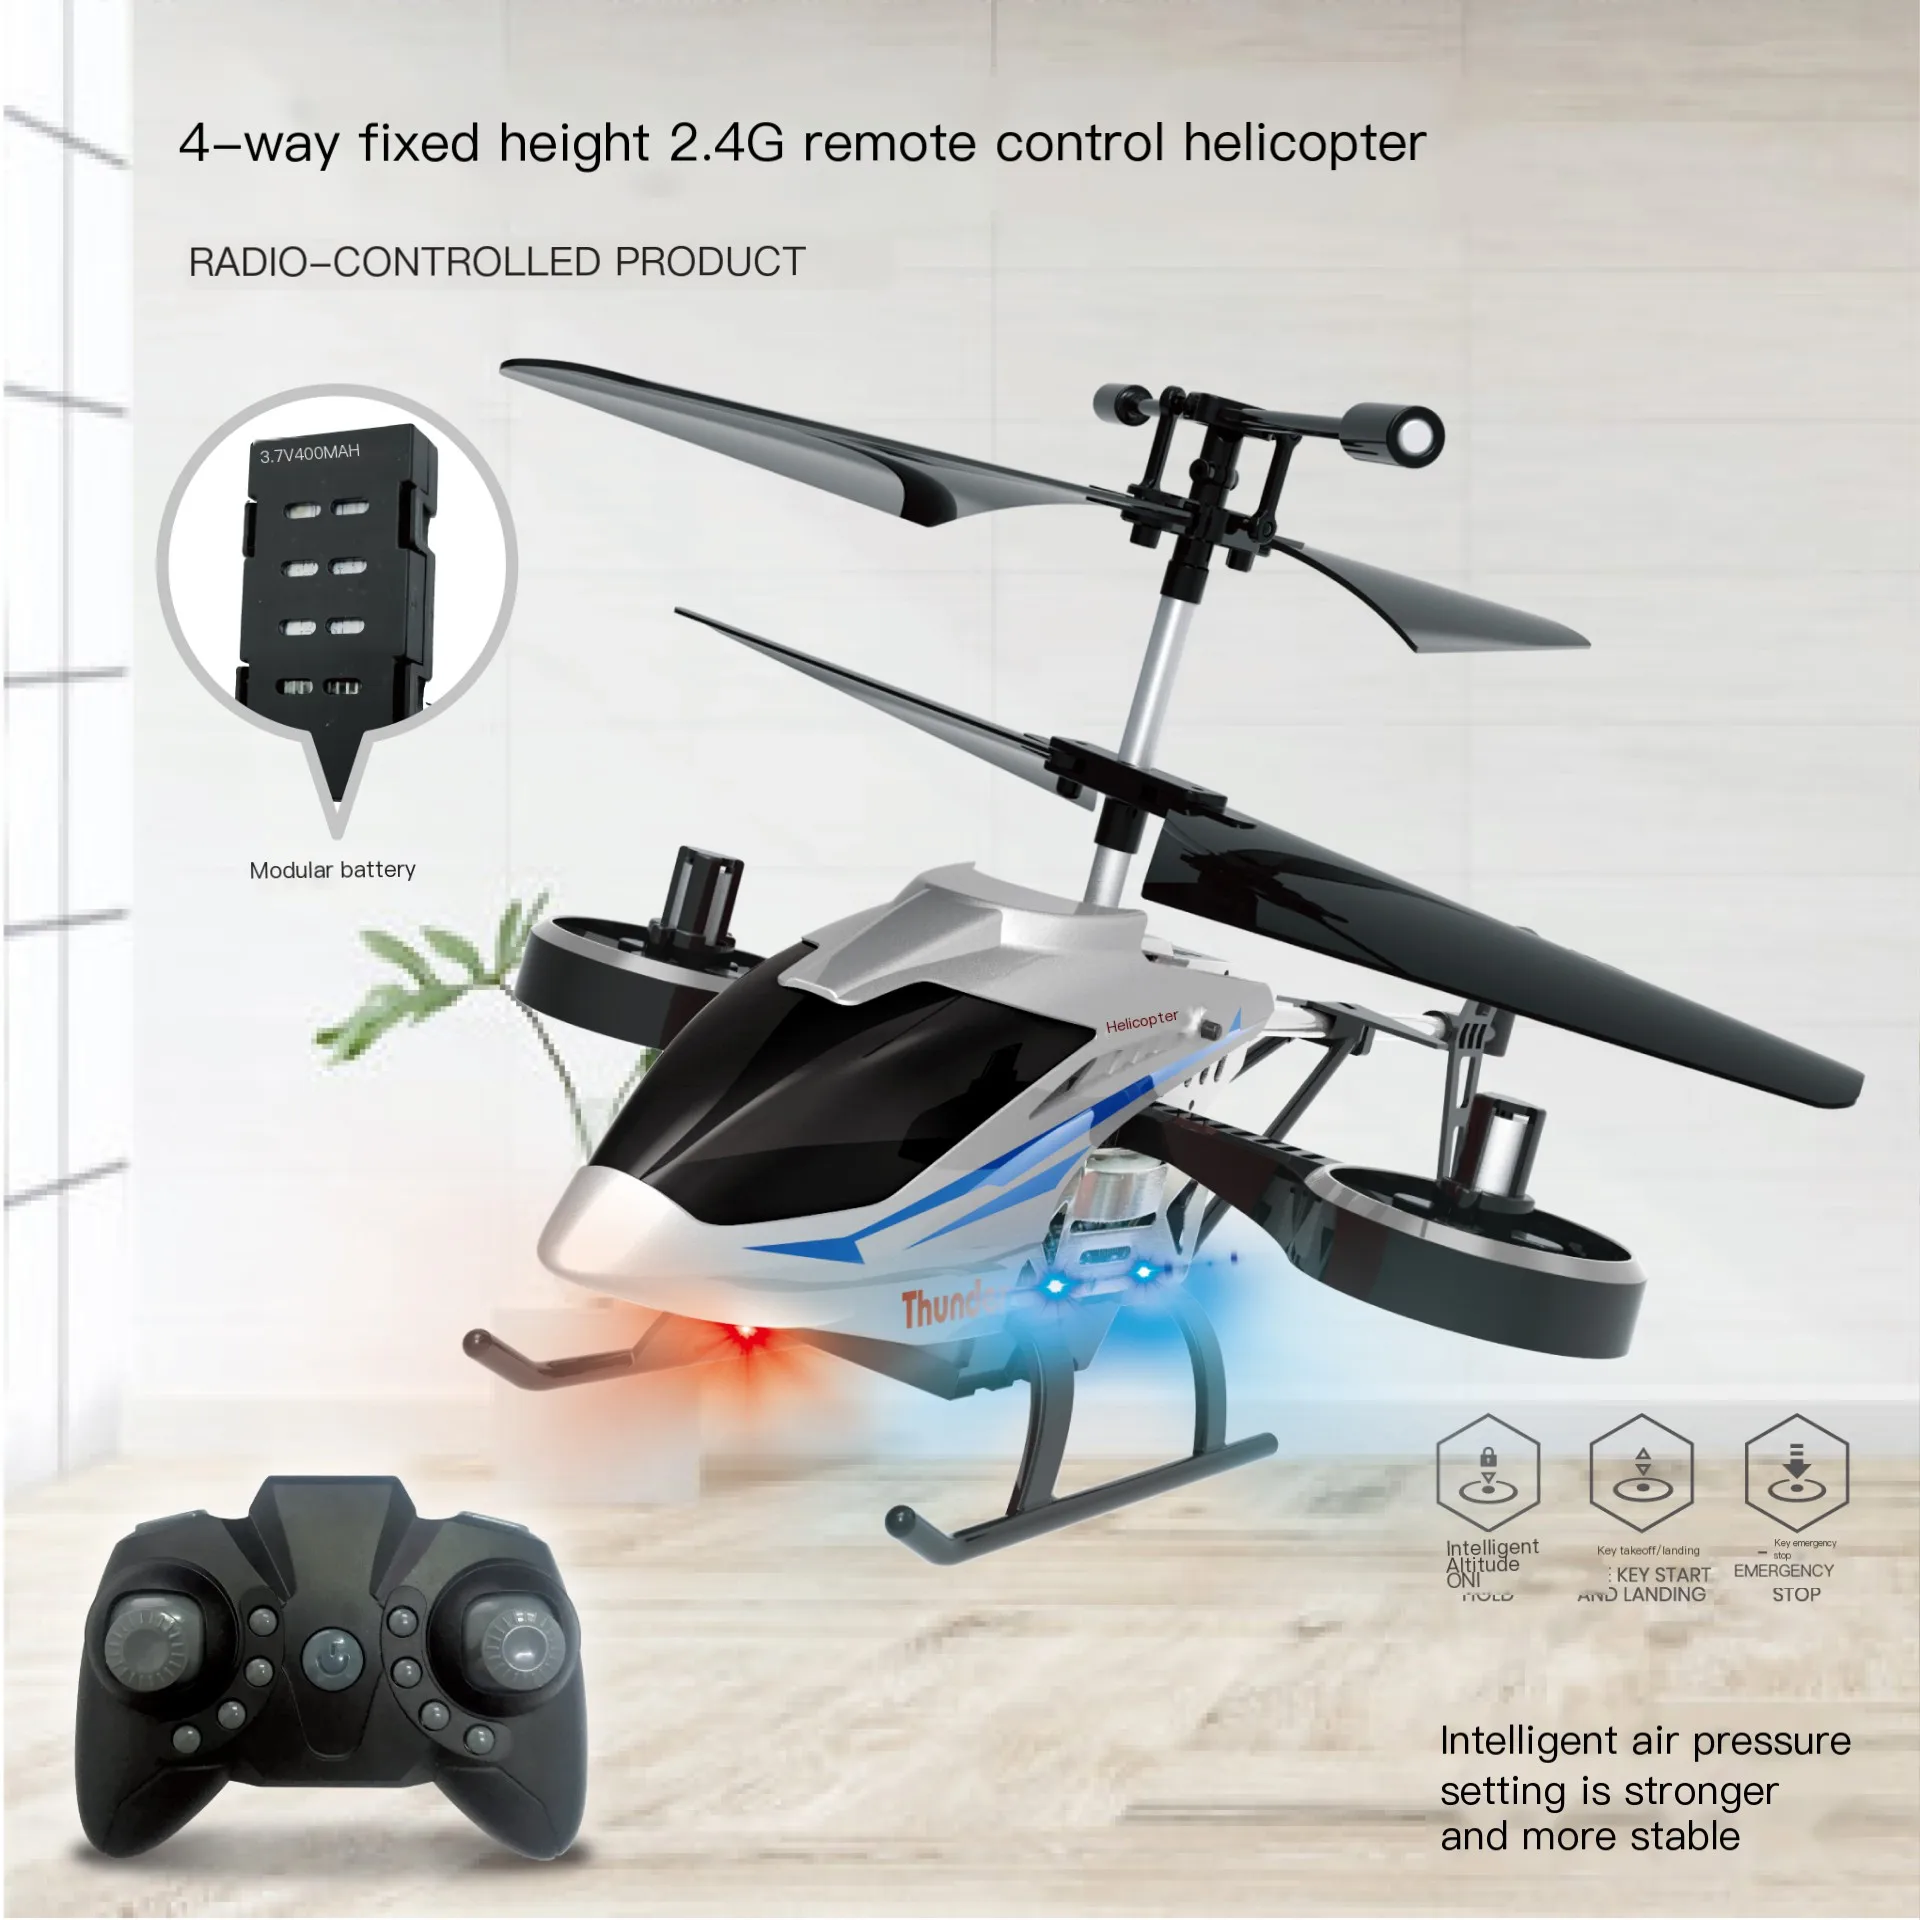 

3.5CH/4CH Large Flight RC Helicopter 2.4G Anti-Collision Anti-Fall Light Sensing Toy Outdoor Aircraft Gift for Kids